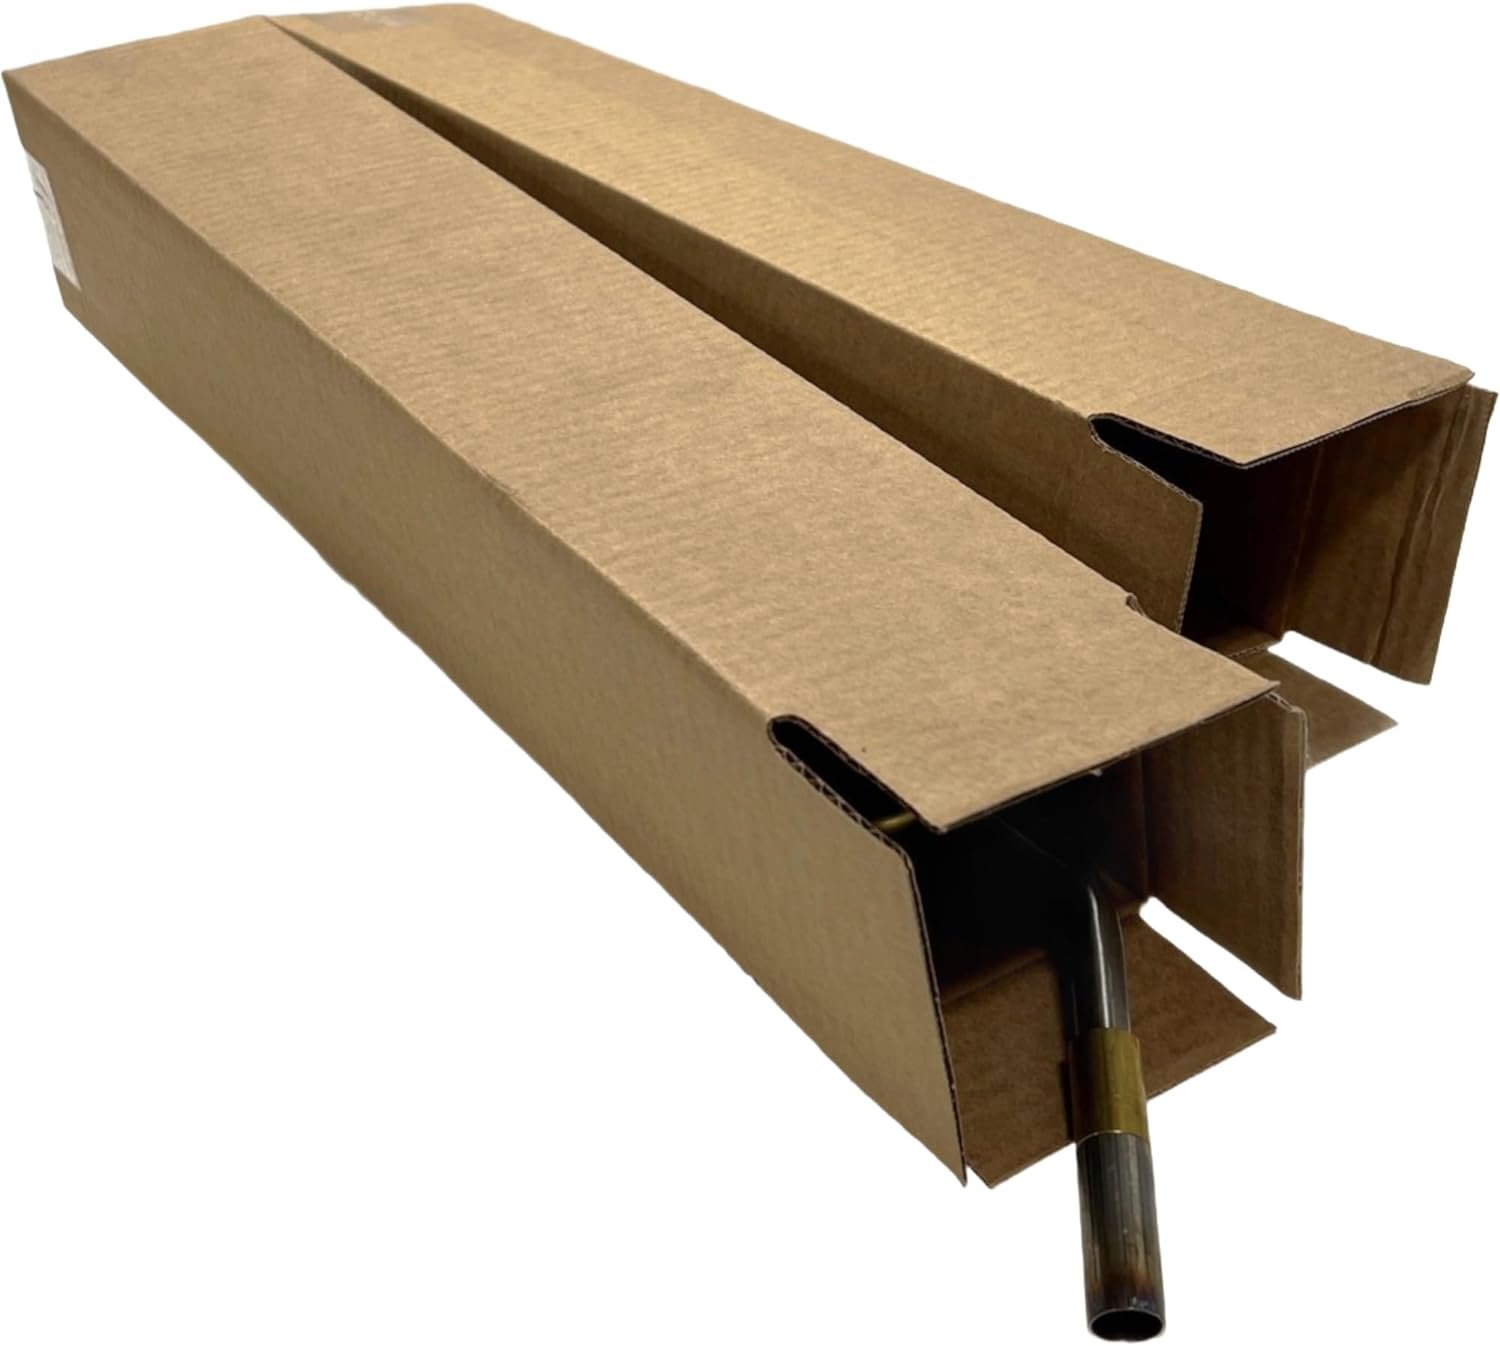 100 4x4x8 Cardboard Paper Boxes Mailing Packing Shipping Box Corrugated Carton